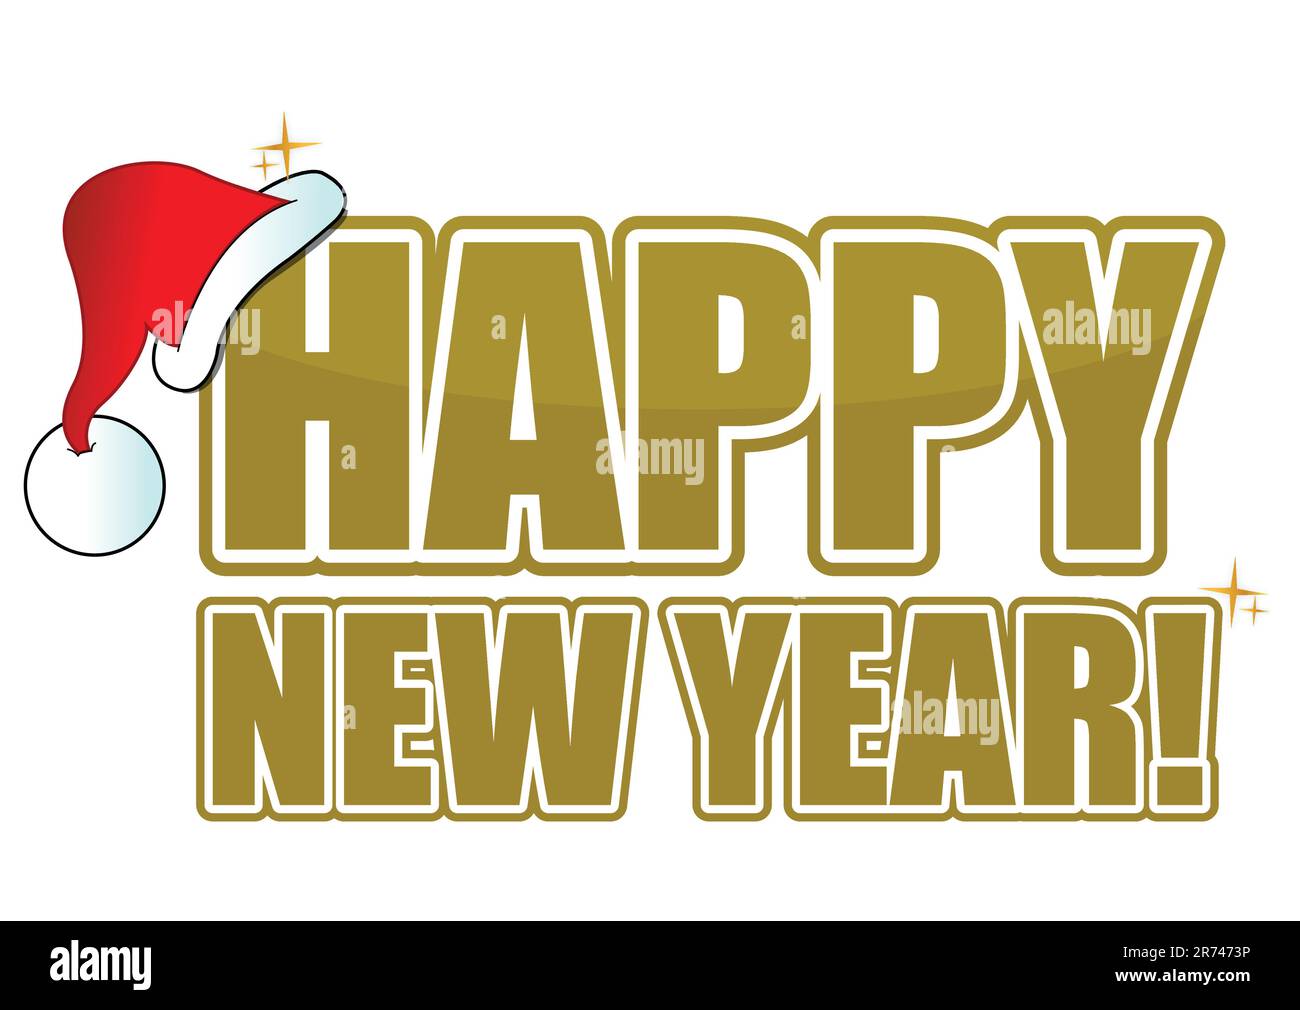 Golden happy new year text with a santa hat. Stock Vector